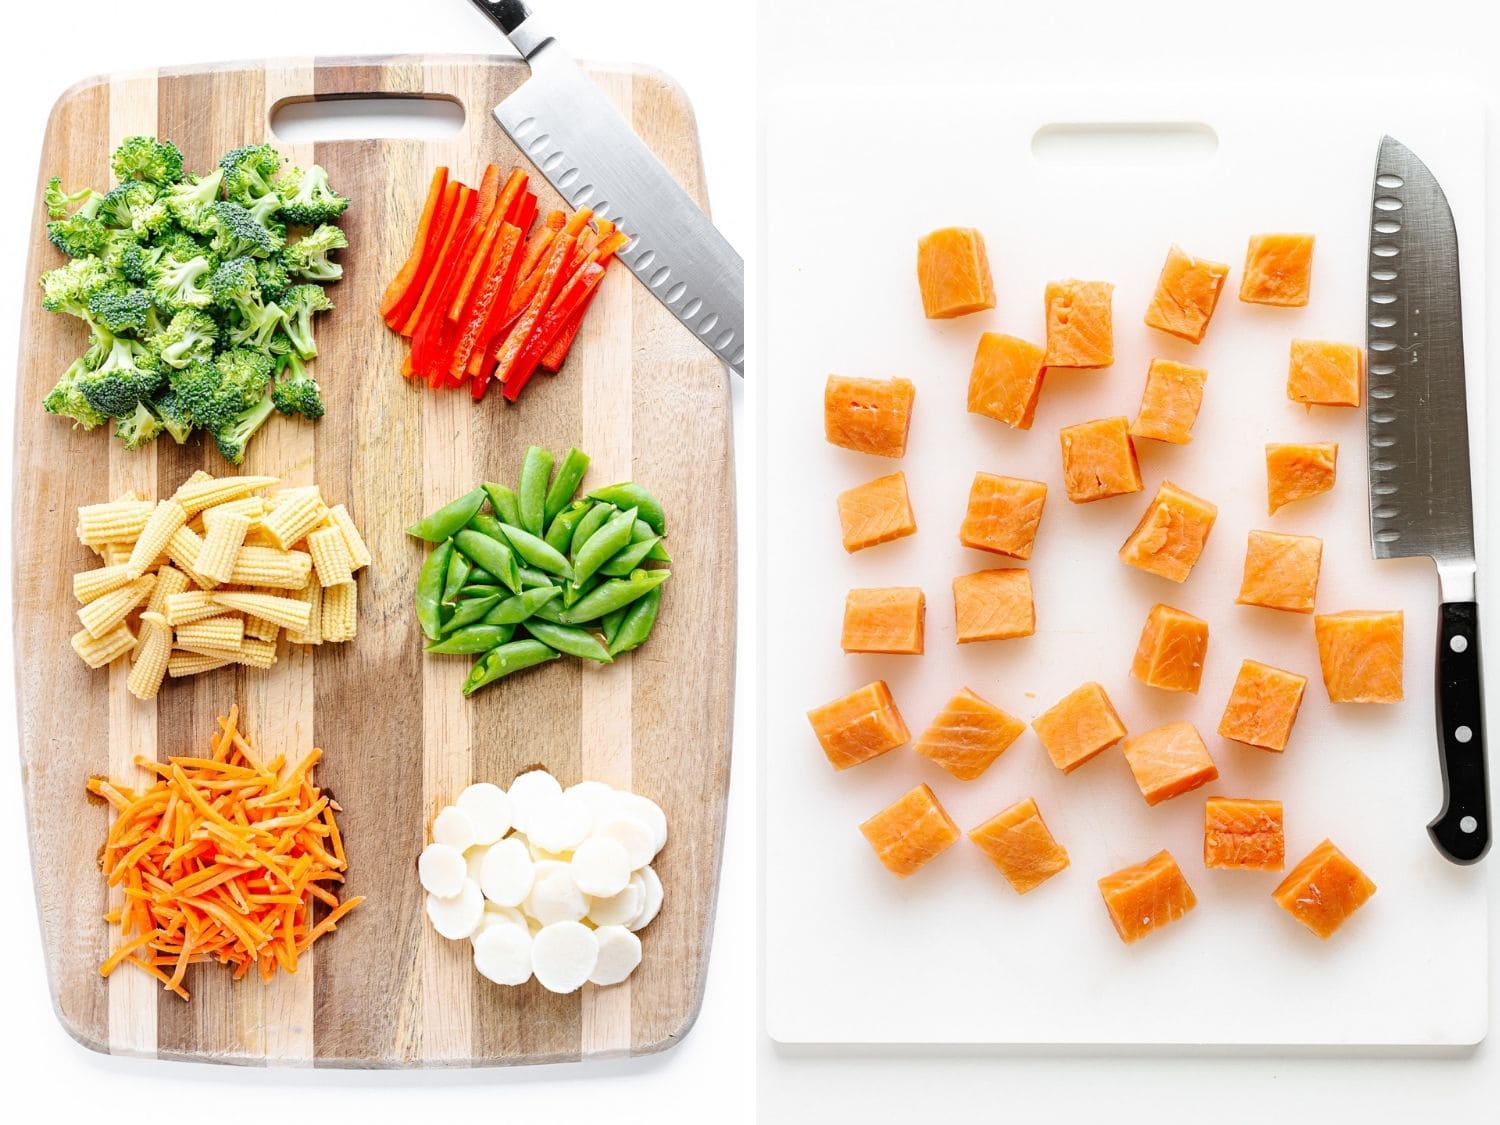 Wooden cutting board with a variety of veggies chopped for stir fry and a white plastic cutting board with cubed salmon.